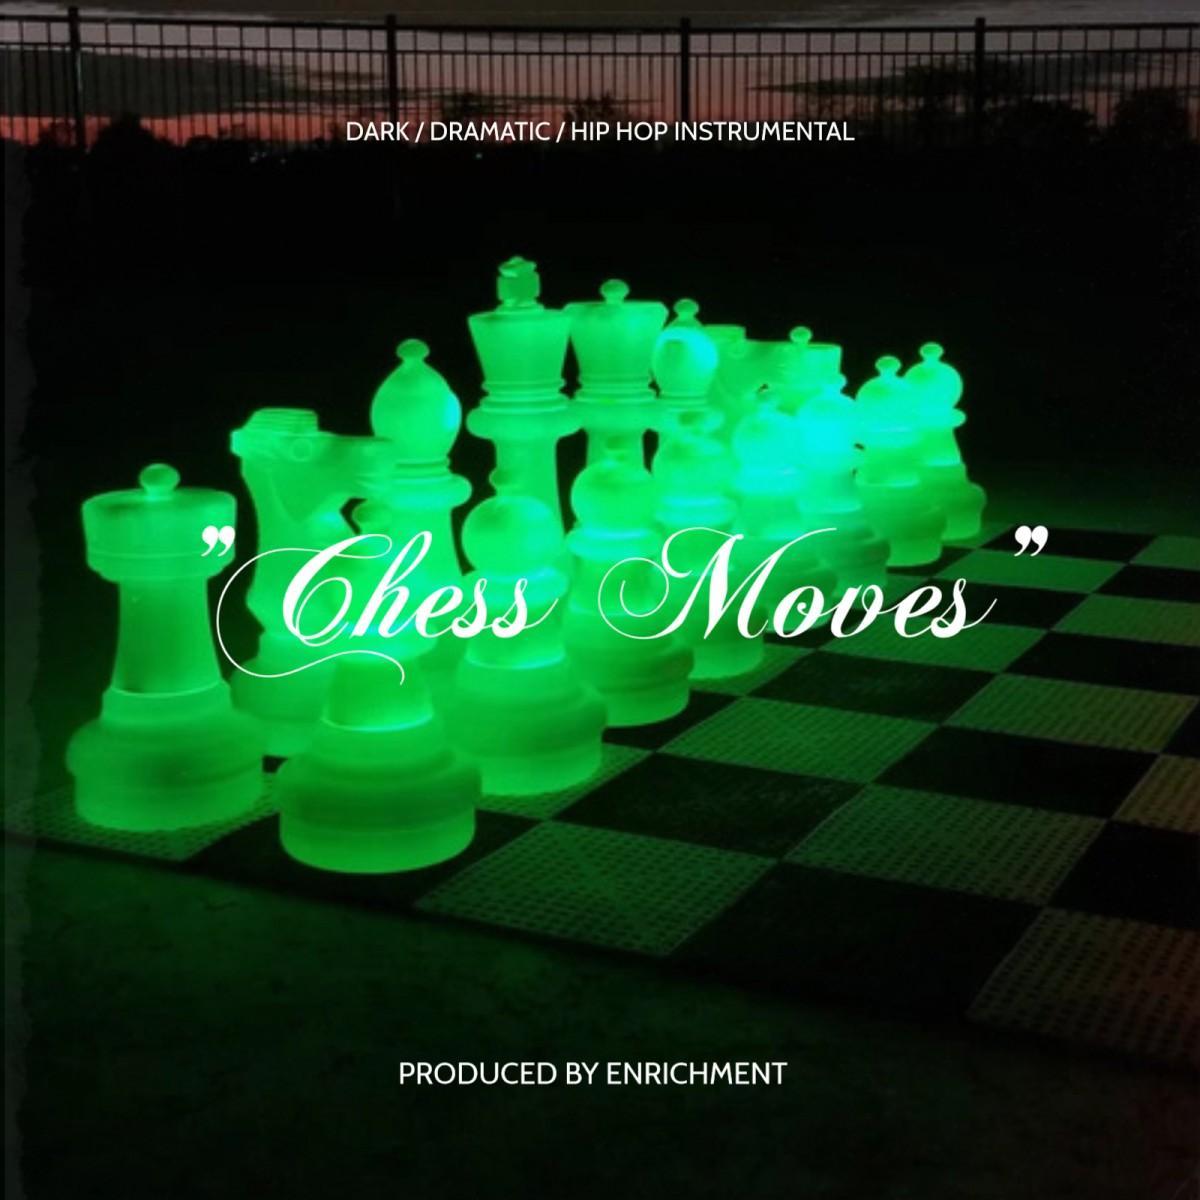 Cover of Chess Moves